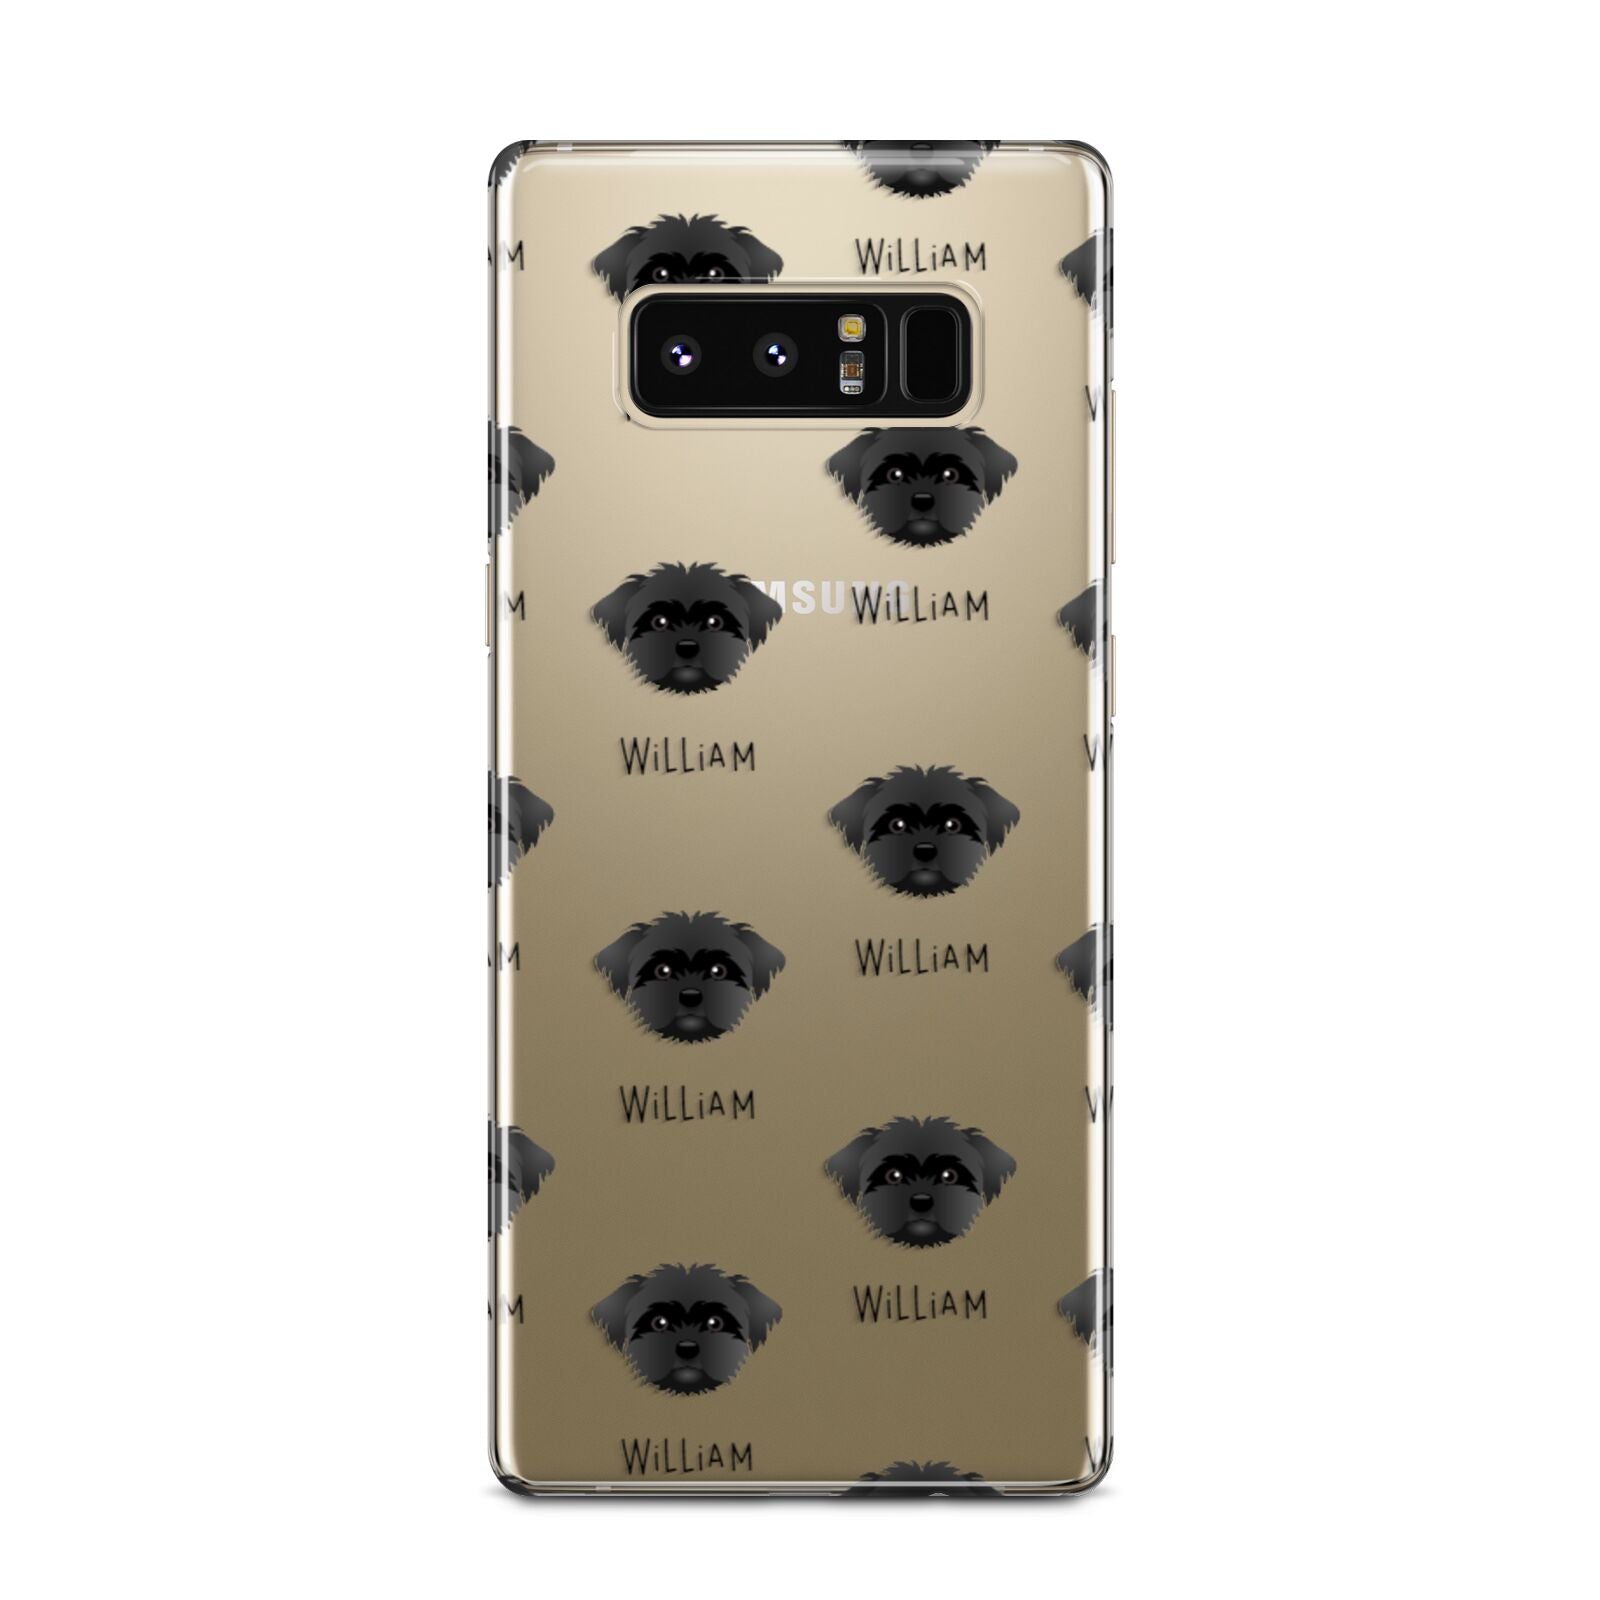 Peek a poo Icon with Name Samsung Galaxy Note 8 Case